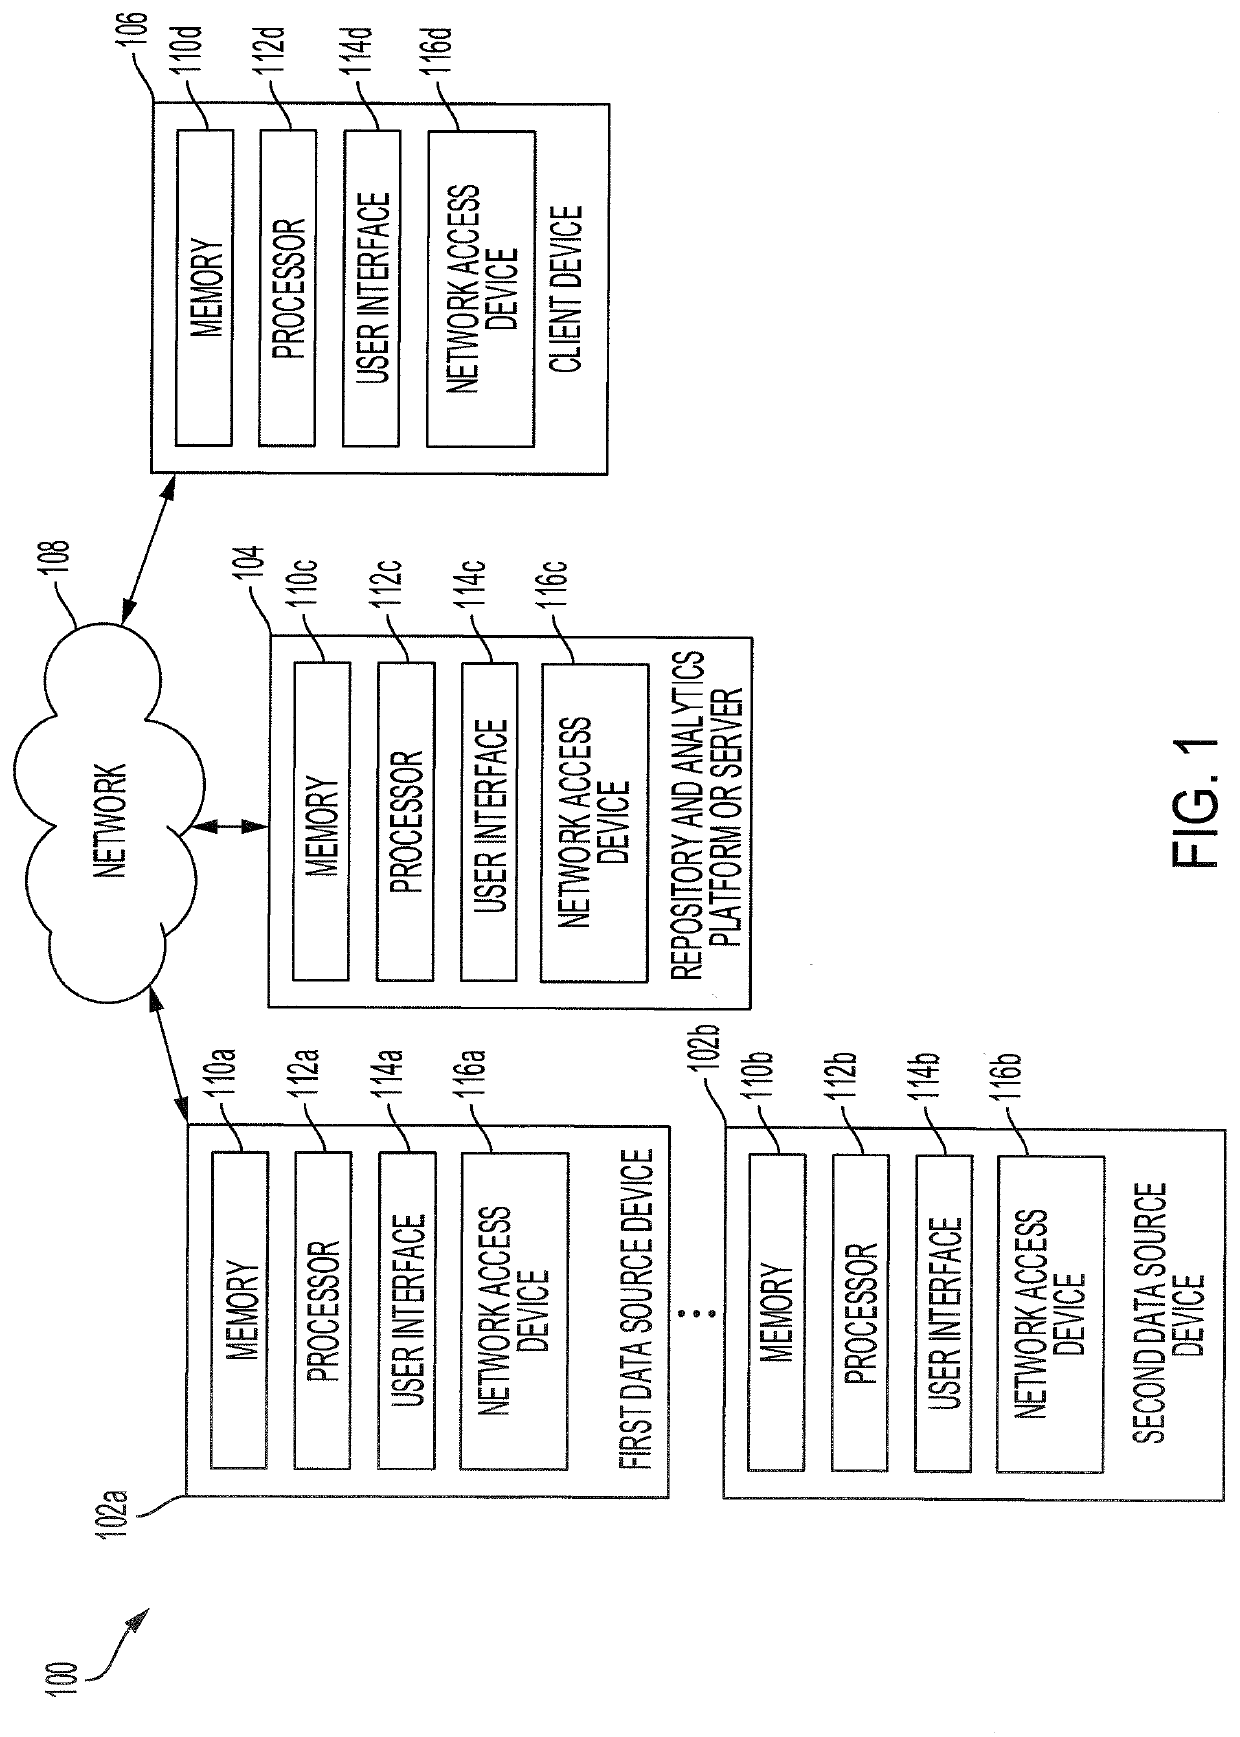 Methods and analytical tools for the study and treatment of epileptogenesis